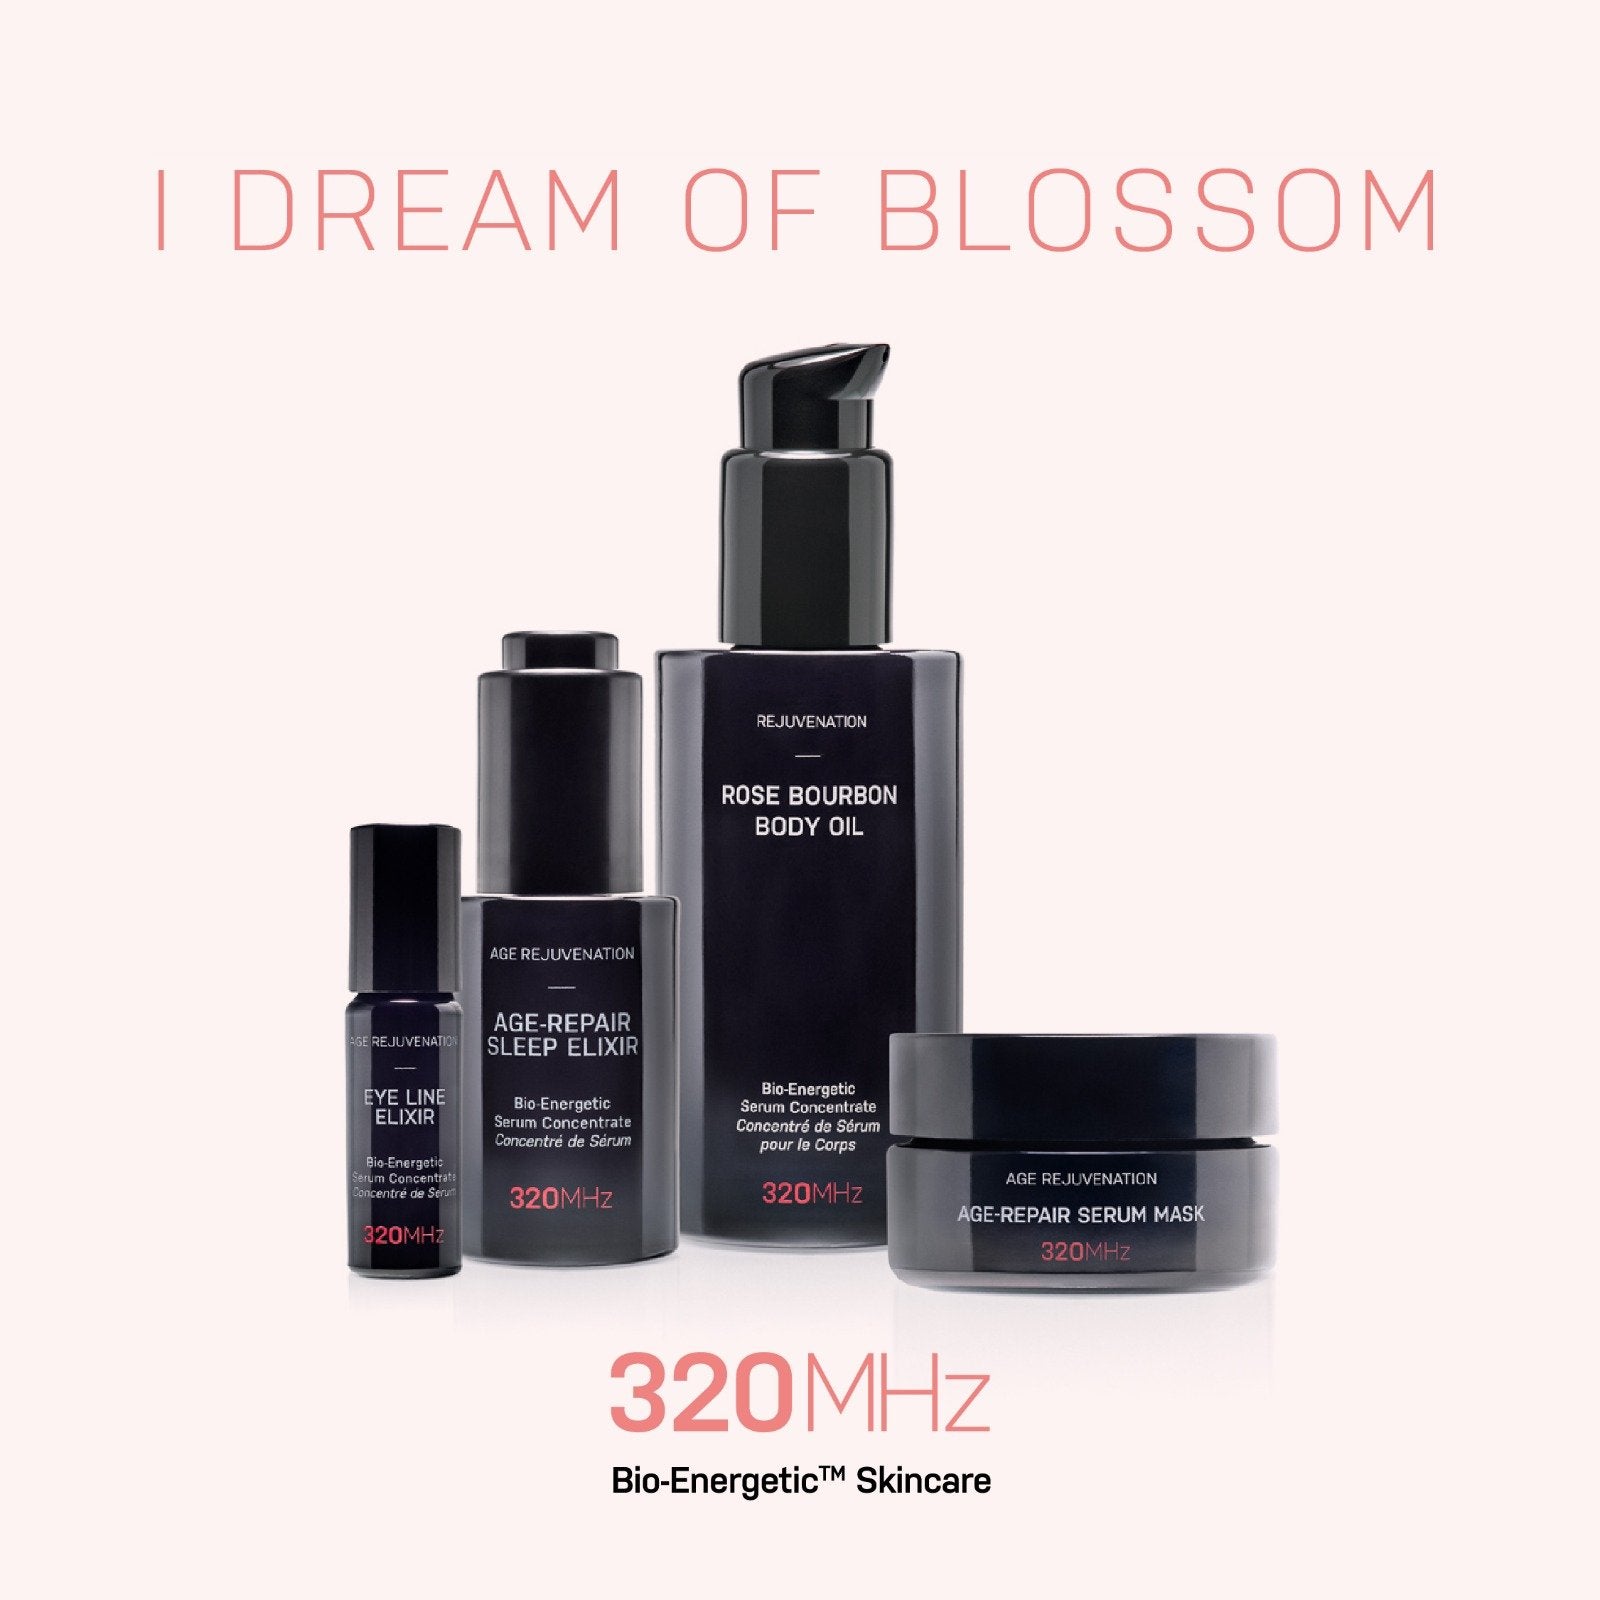 "I Dream of Blossom" Age Repair Gift Collection - SAVE 40%